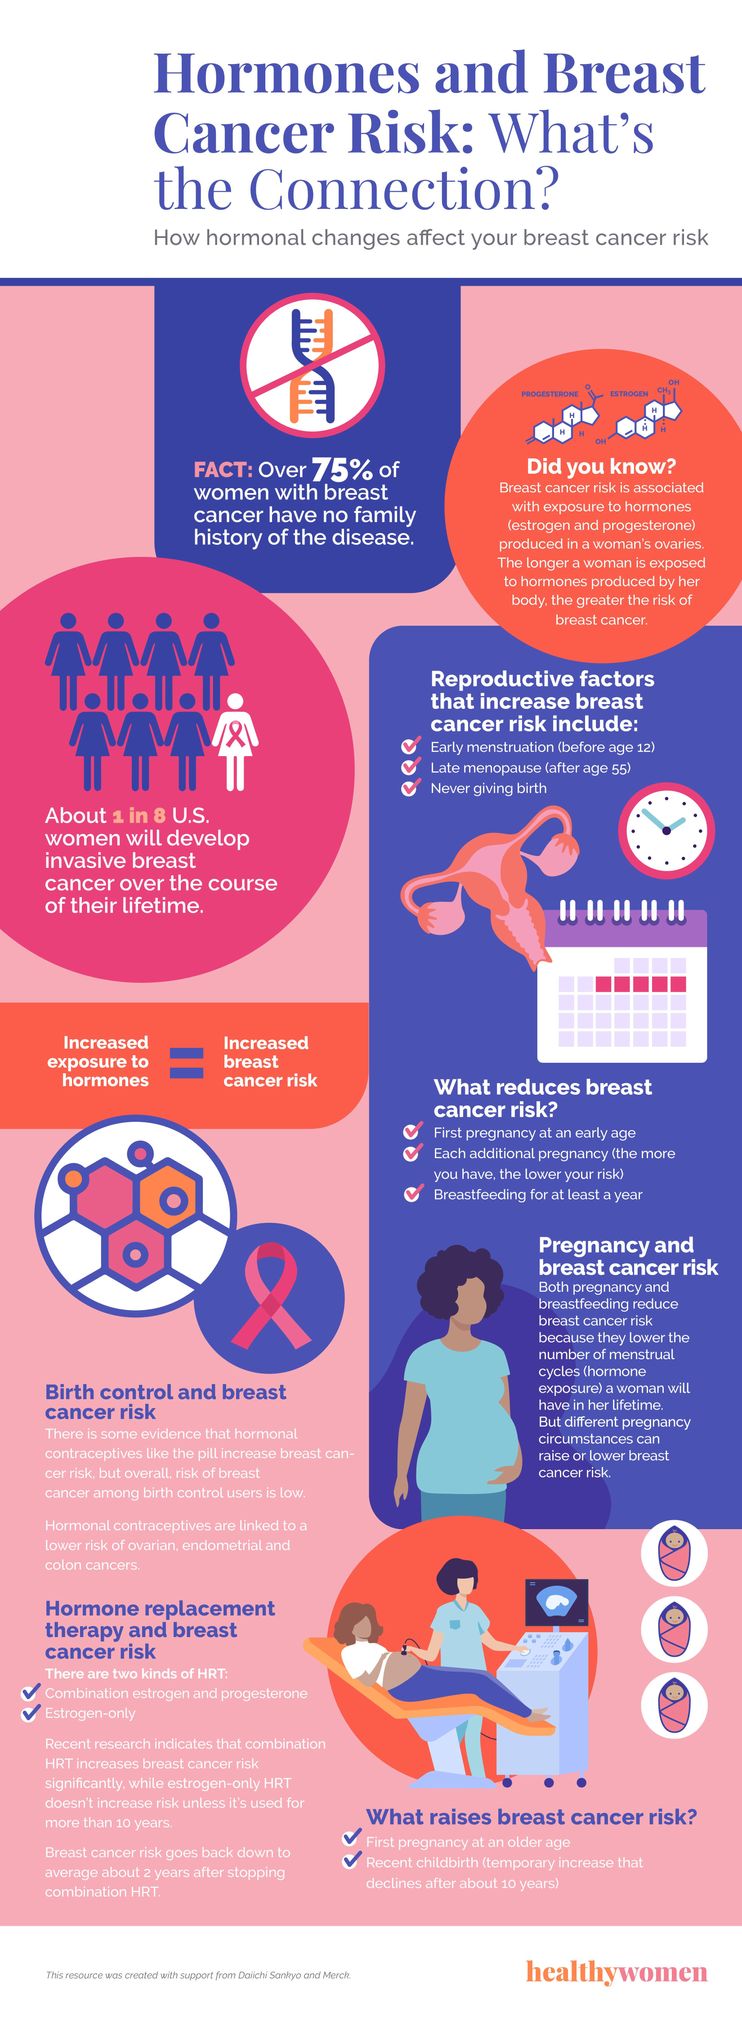 Hormone Therapy for Breast Cancer Fact Sheet - NCI